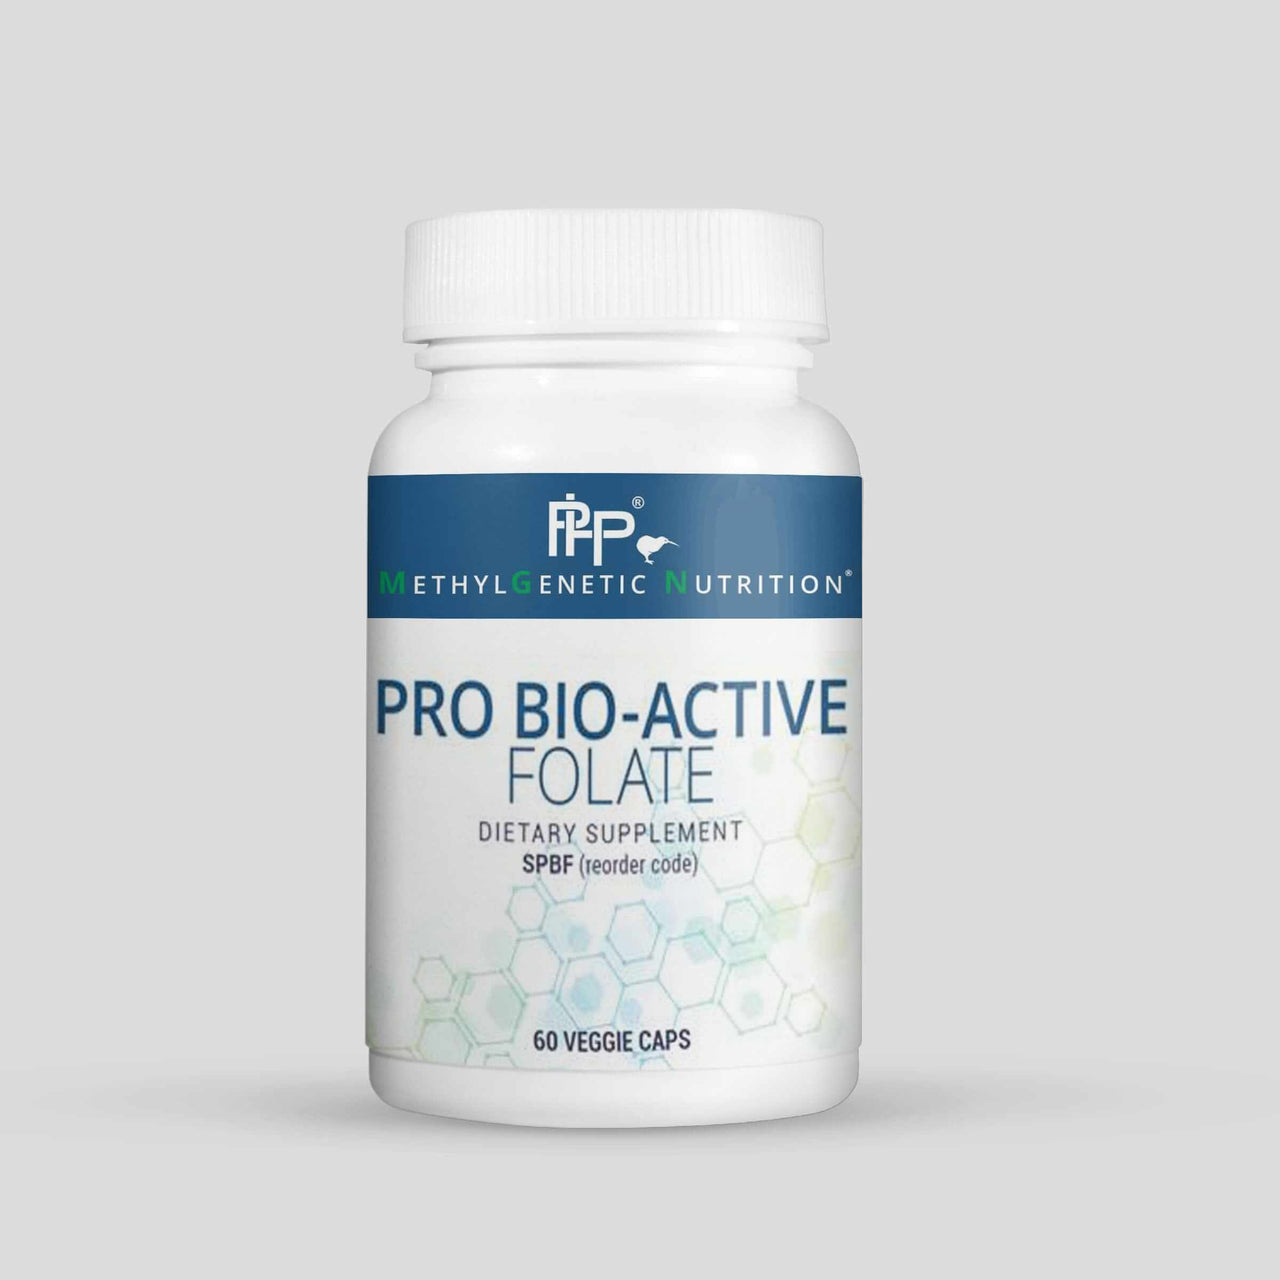 Pro Bio-Active Folate * Prof Health Products Supplement - Conners Clinic